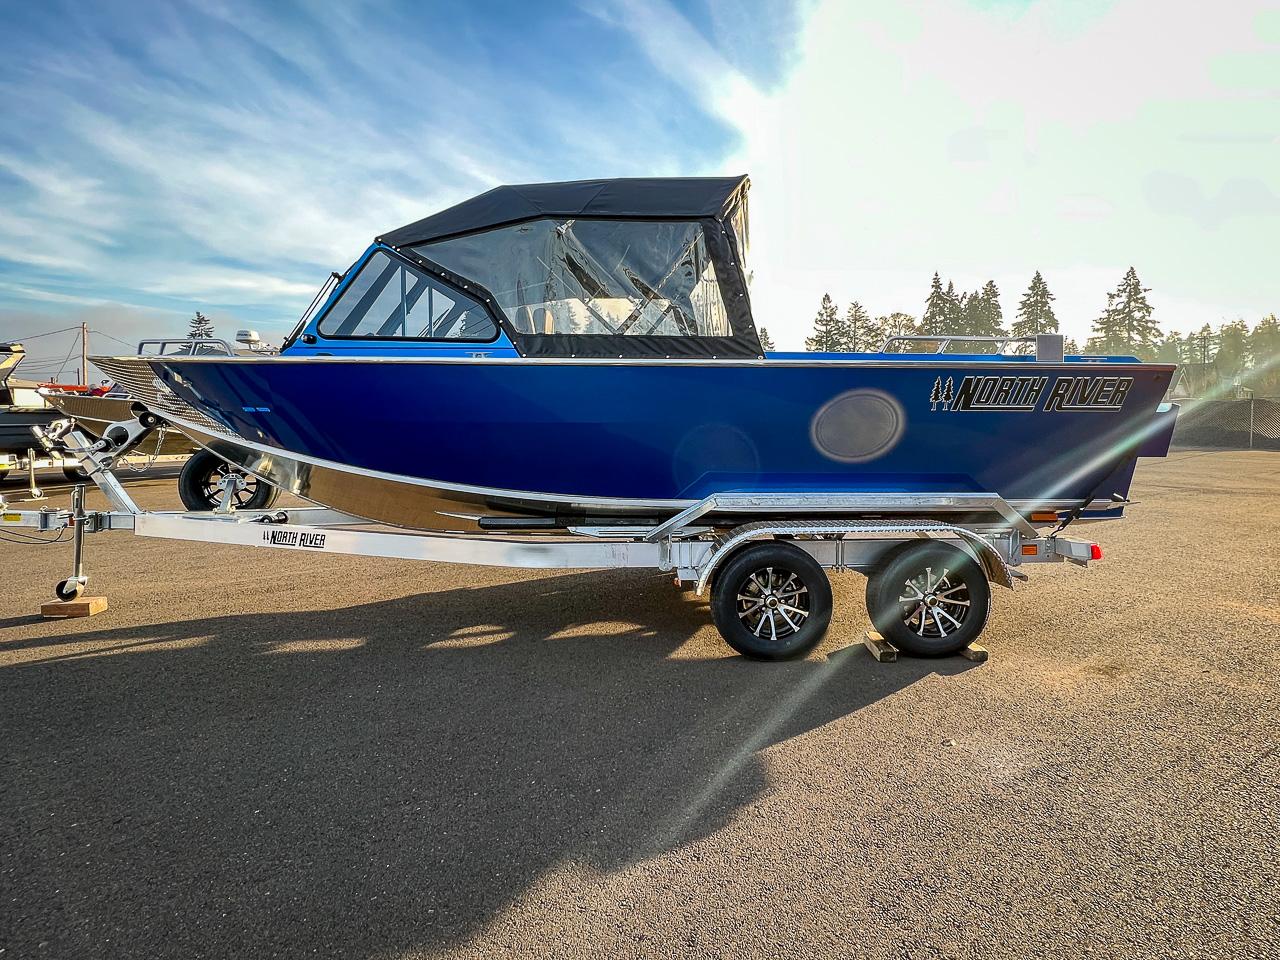 North River 22 Seahawk - Available